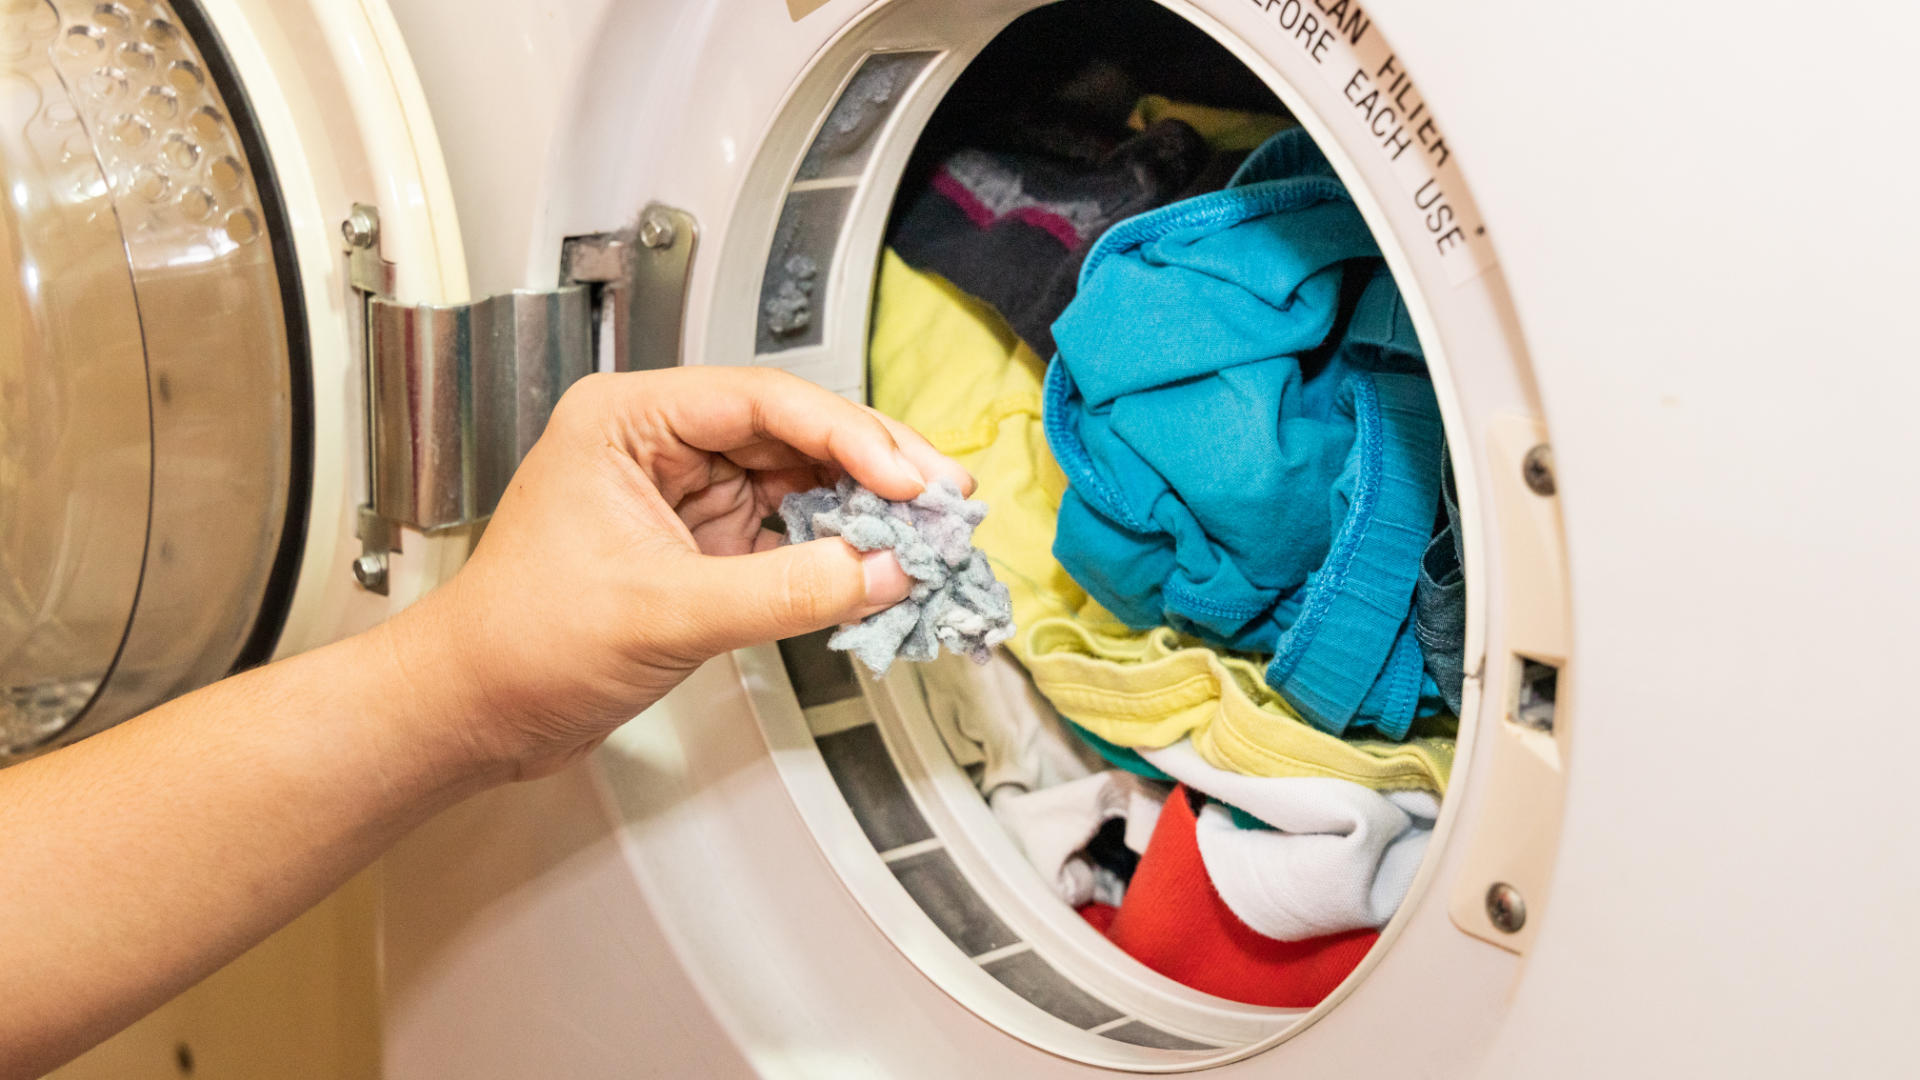 How To Fix A Dryer Not Heating Dryer Not Heating? 10 Common Causes and How to Fix Them - Authorized Service